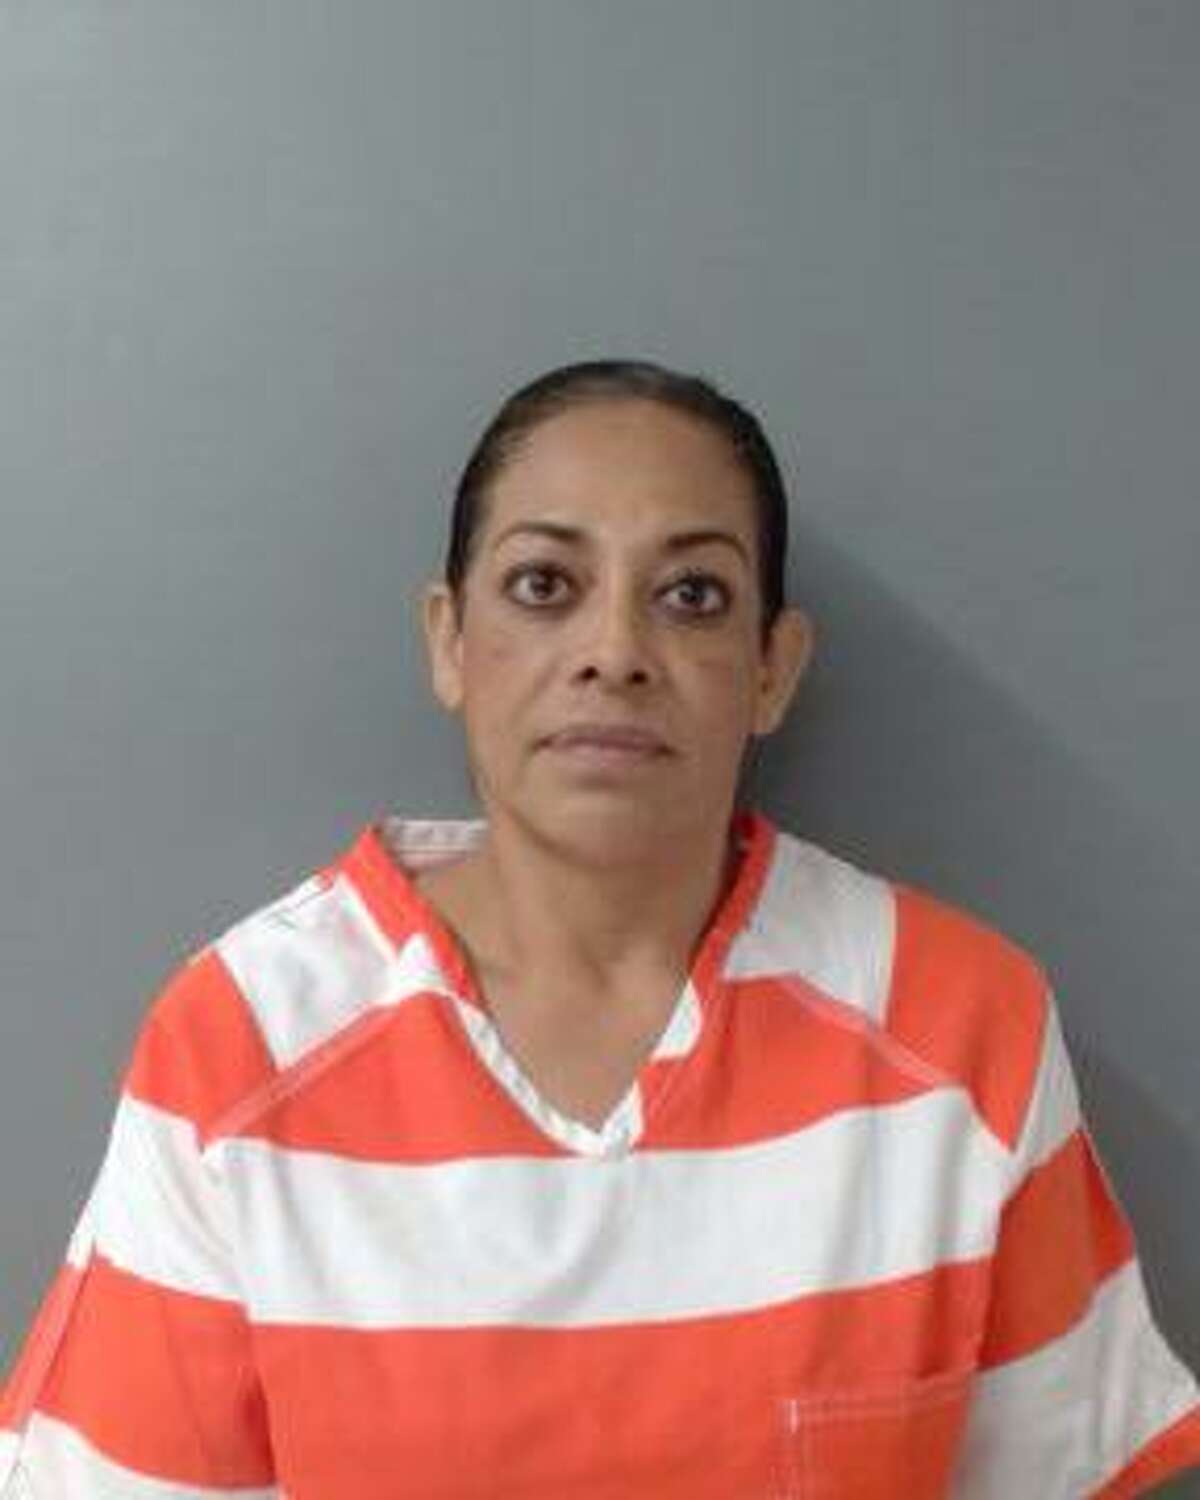 Adriana Lopez, 53, was arrested on Wednesday, May 3, 2023 in Laredo for allegedly breaking 26 slot machines with a sledgehammer and setting her husband's clothing on fire leading to damage to their residence.